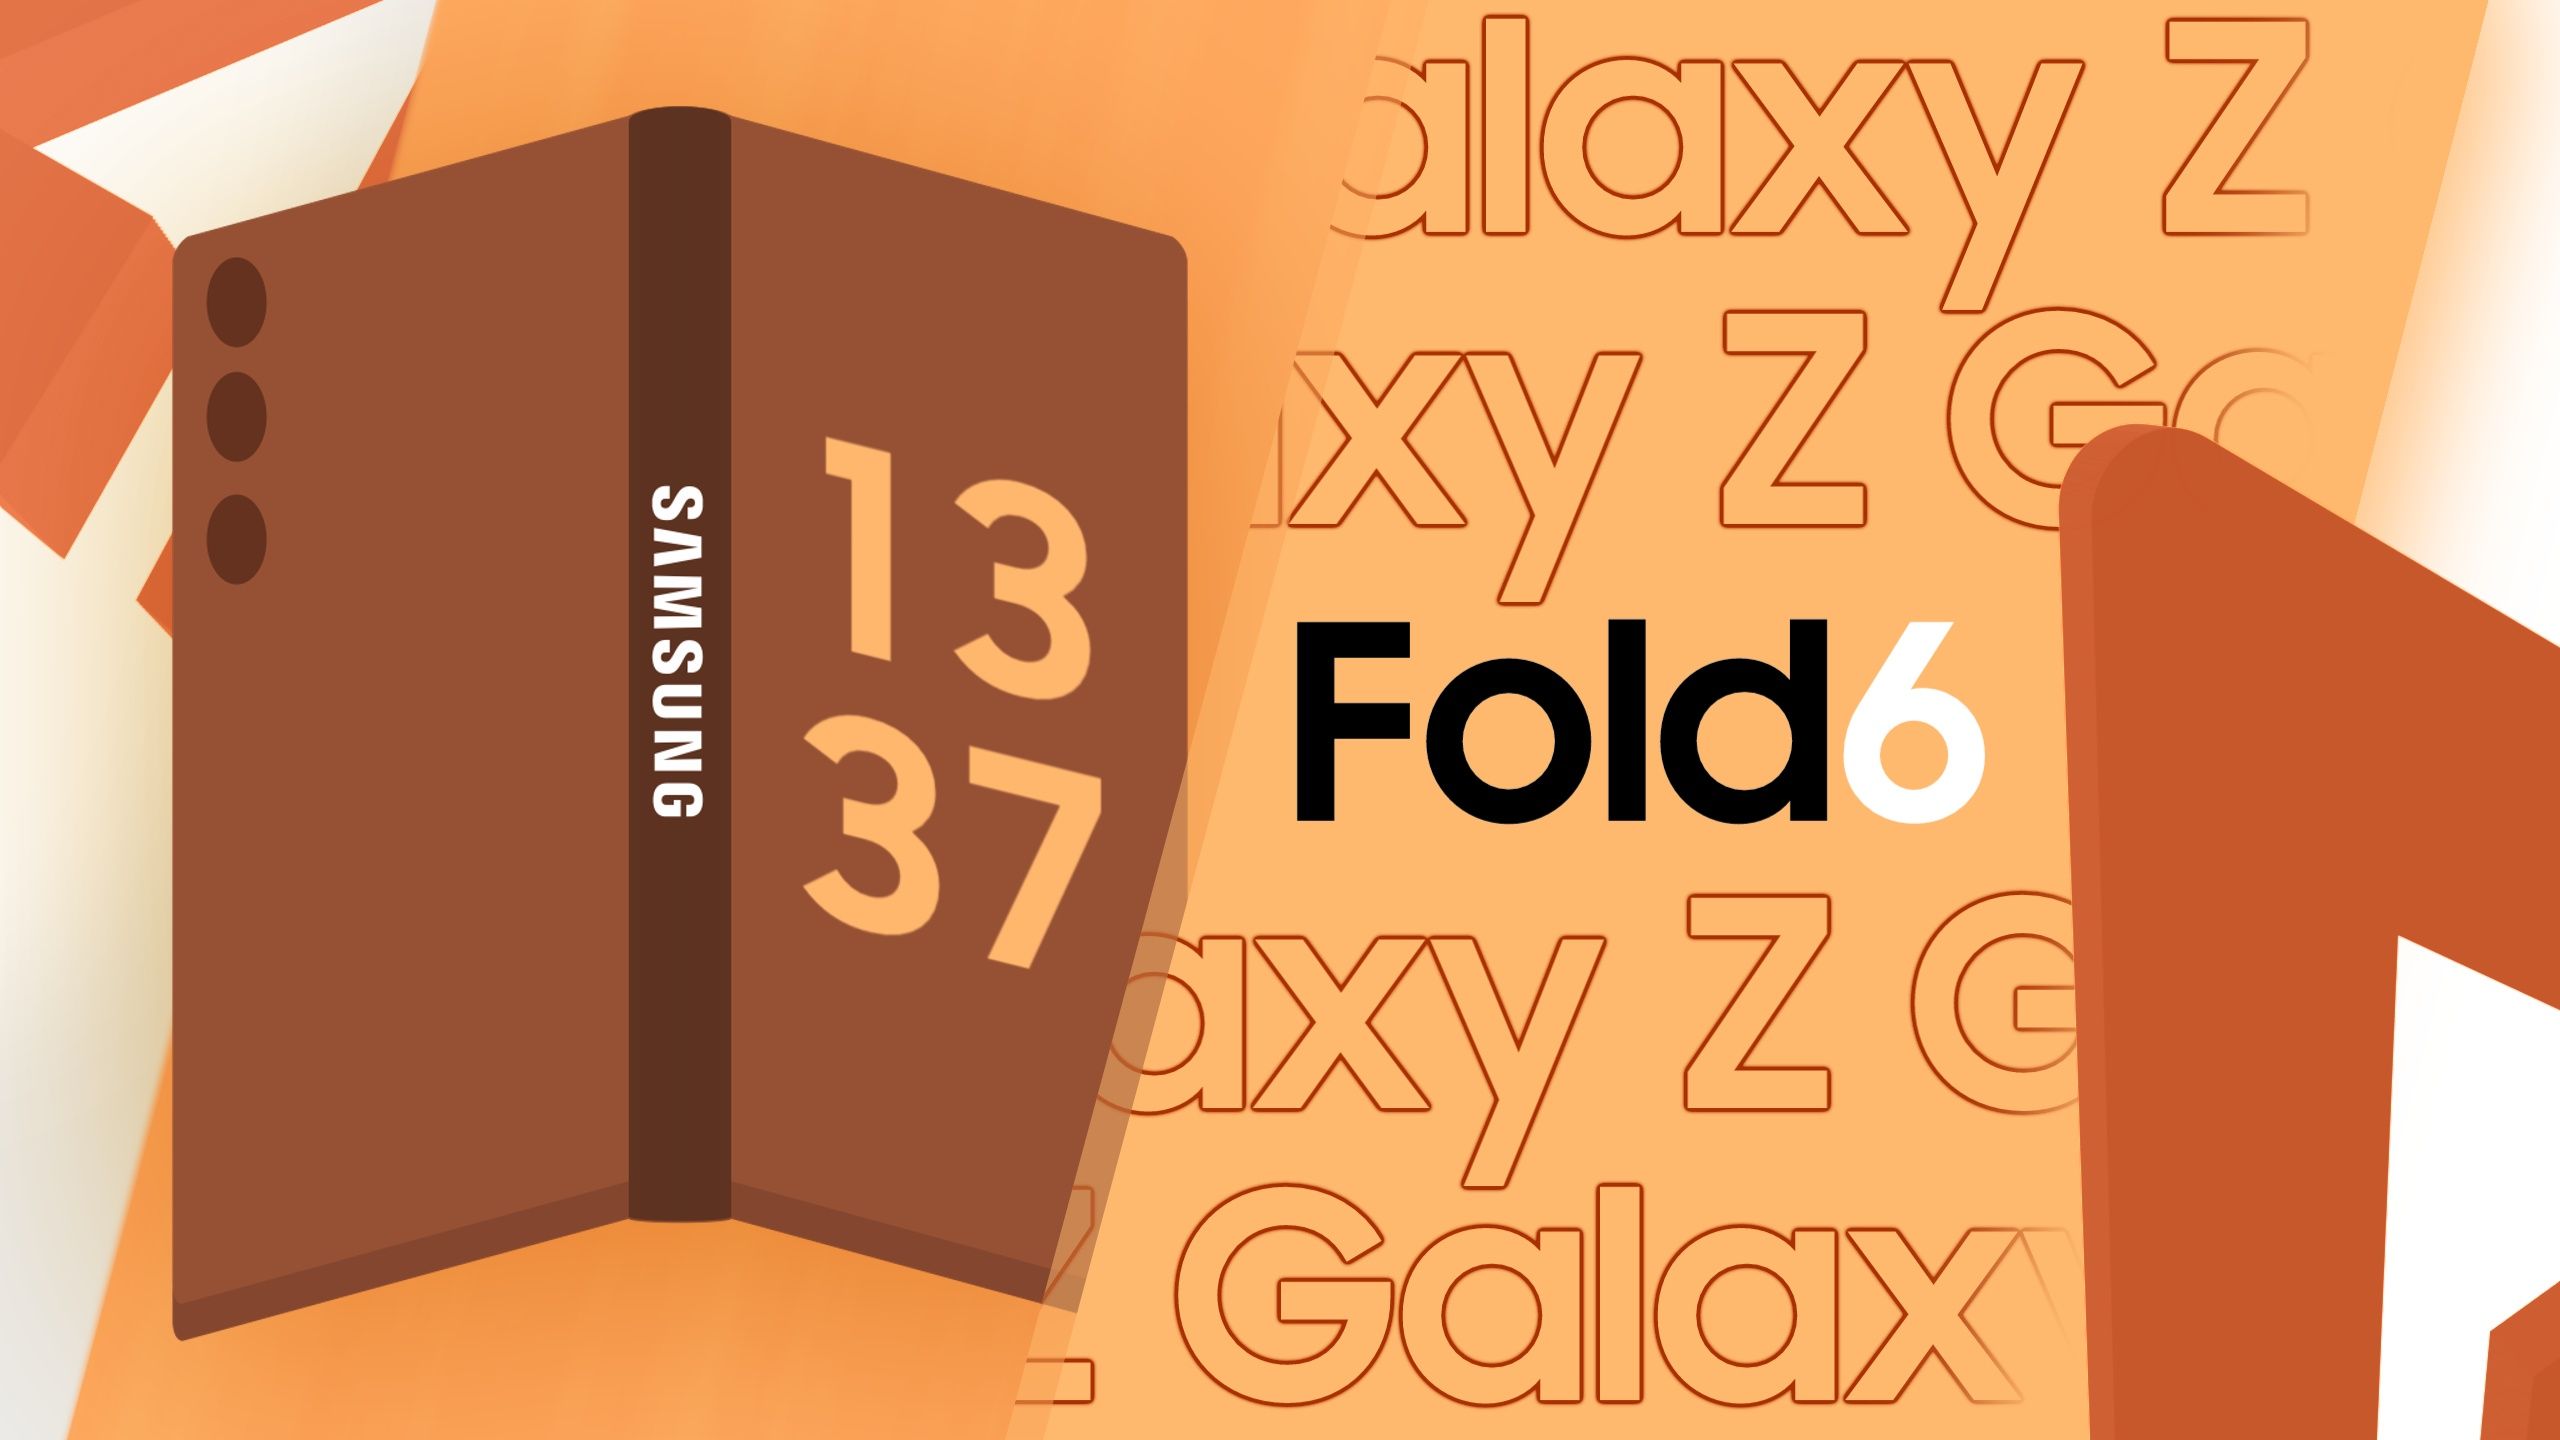 Samsung could open Fold and Flip 6 reservations in India this week